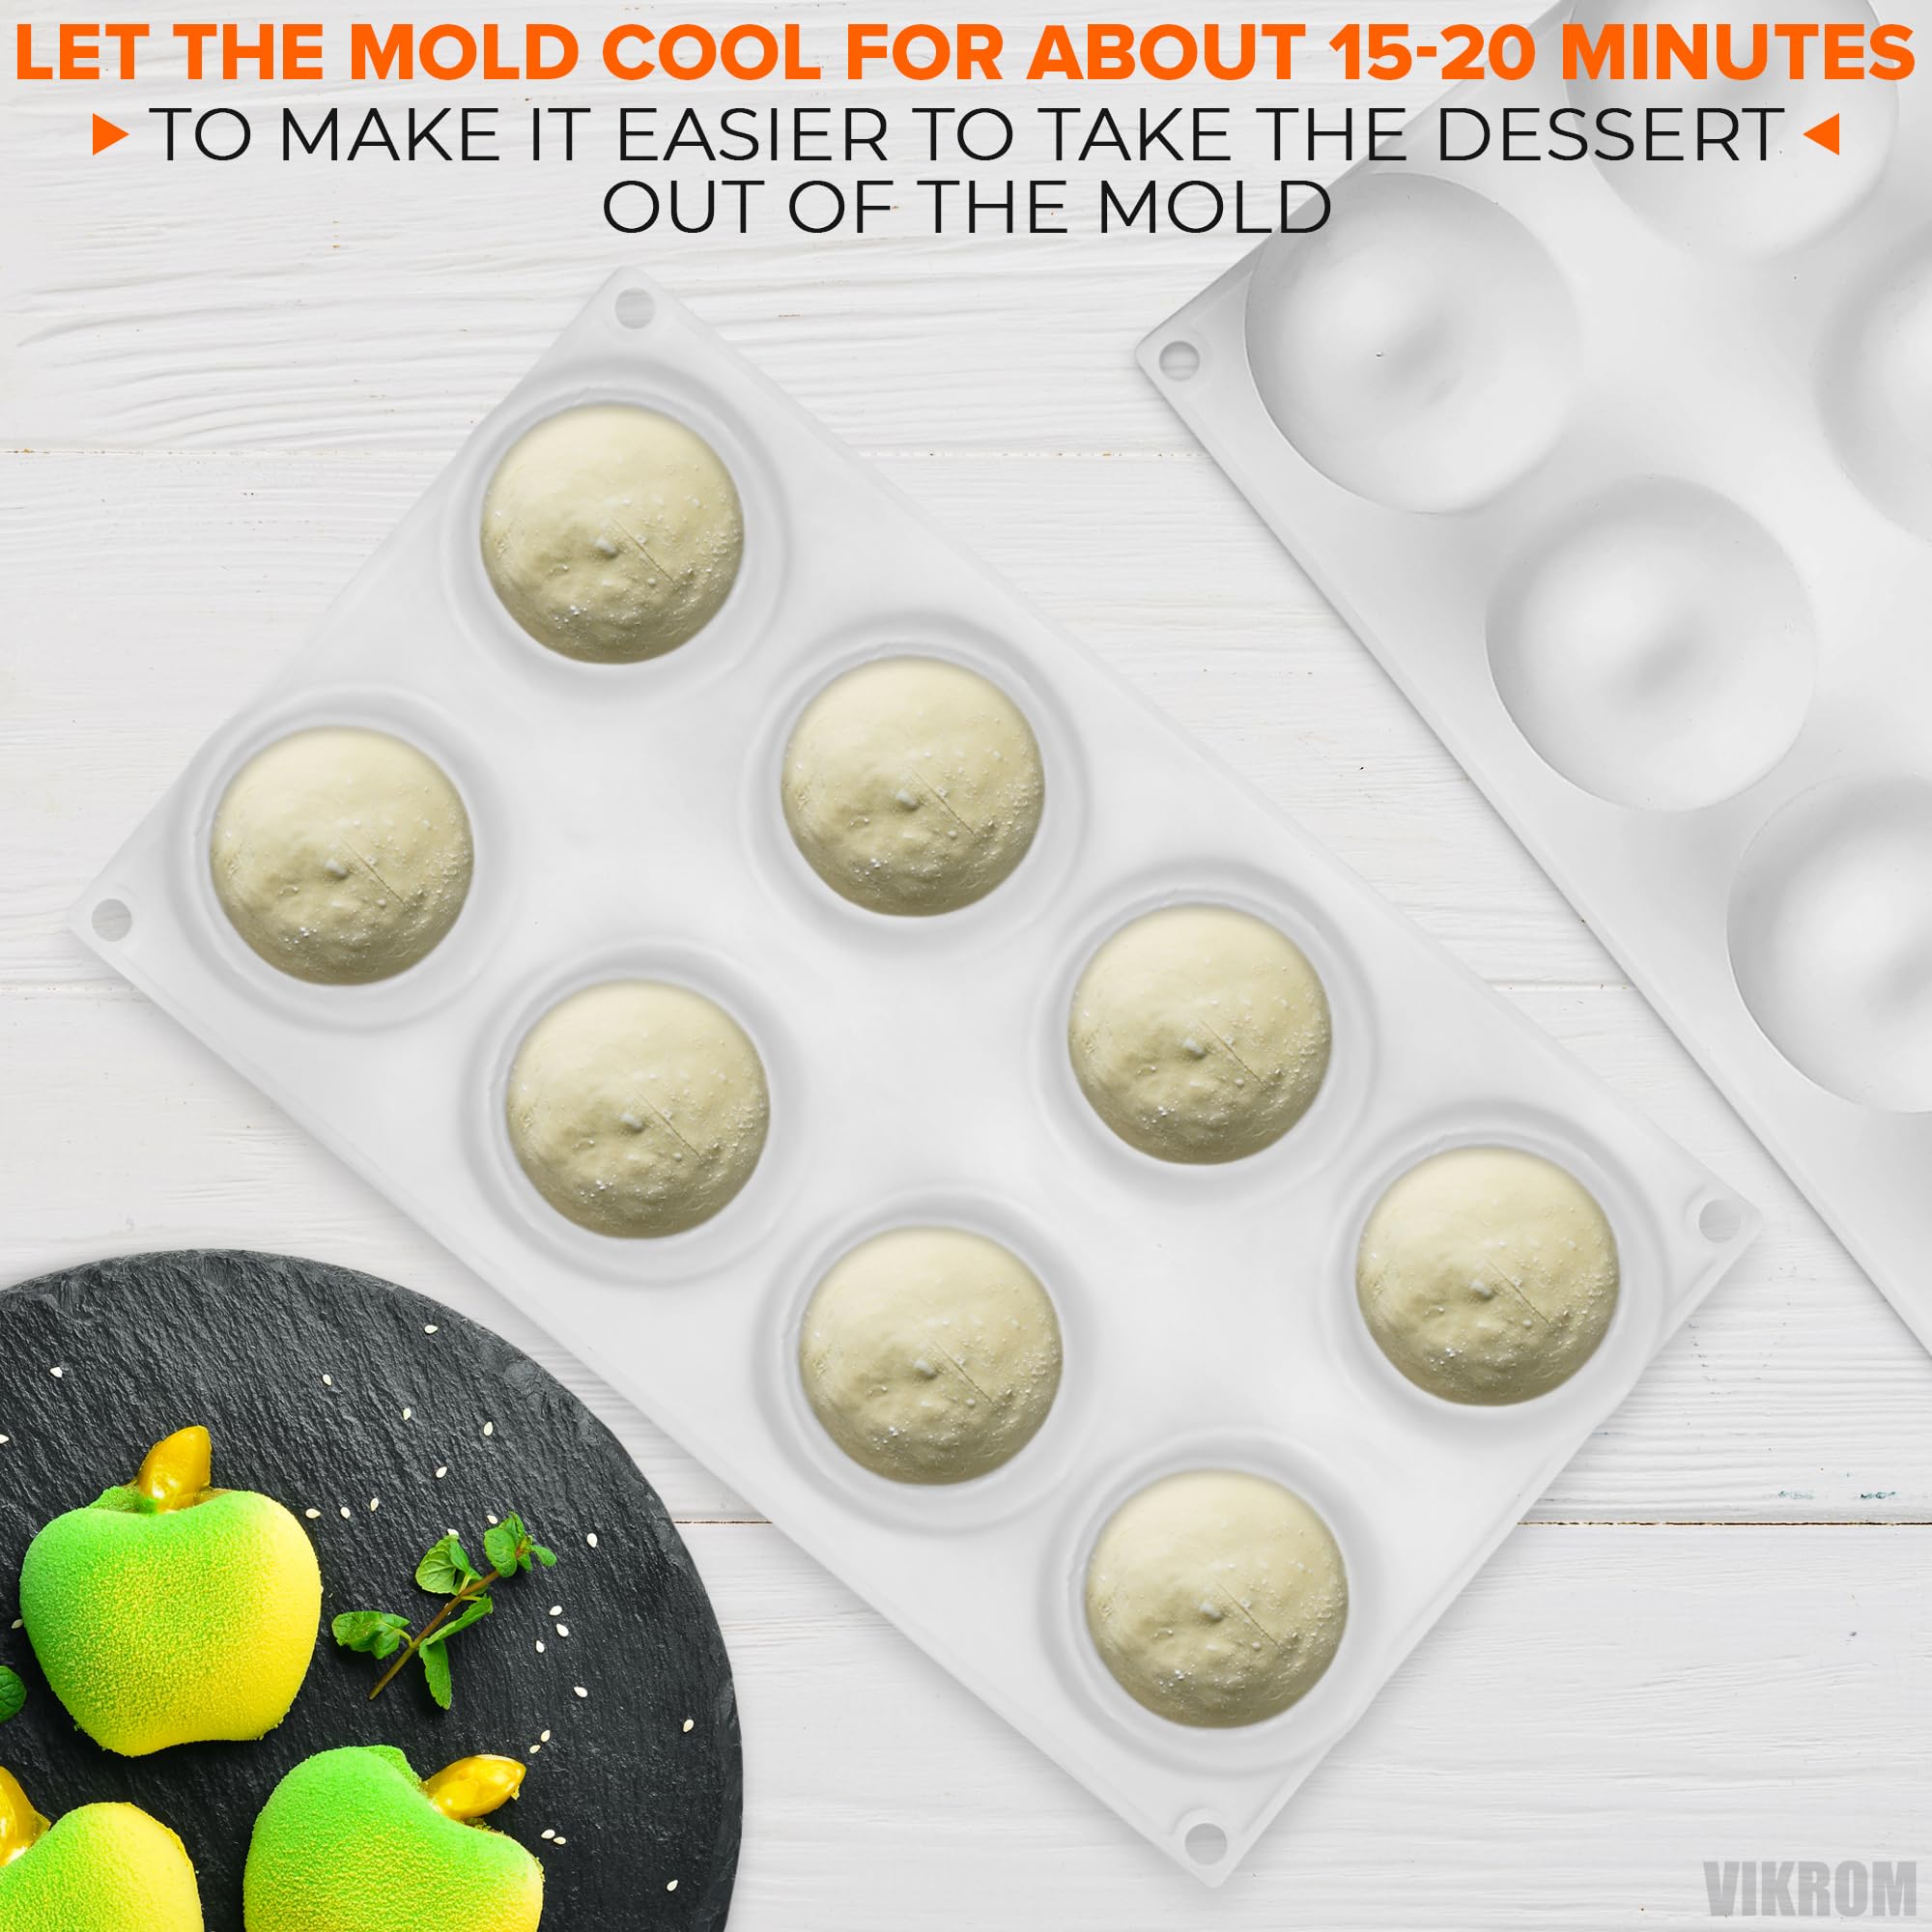 Round Silicone Molds for Chocolate - 8 Cavity Apple Mold 3d Silicone Molds for Baking Molds Silicone Shapes Ice Cream Cake Candy Molds Silicone - White Chocolate Dessert Molds Cake Baking Supplies